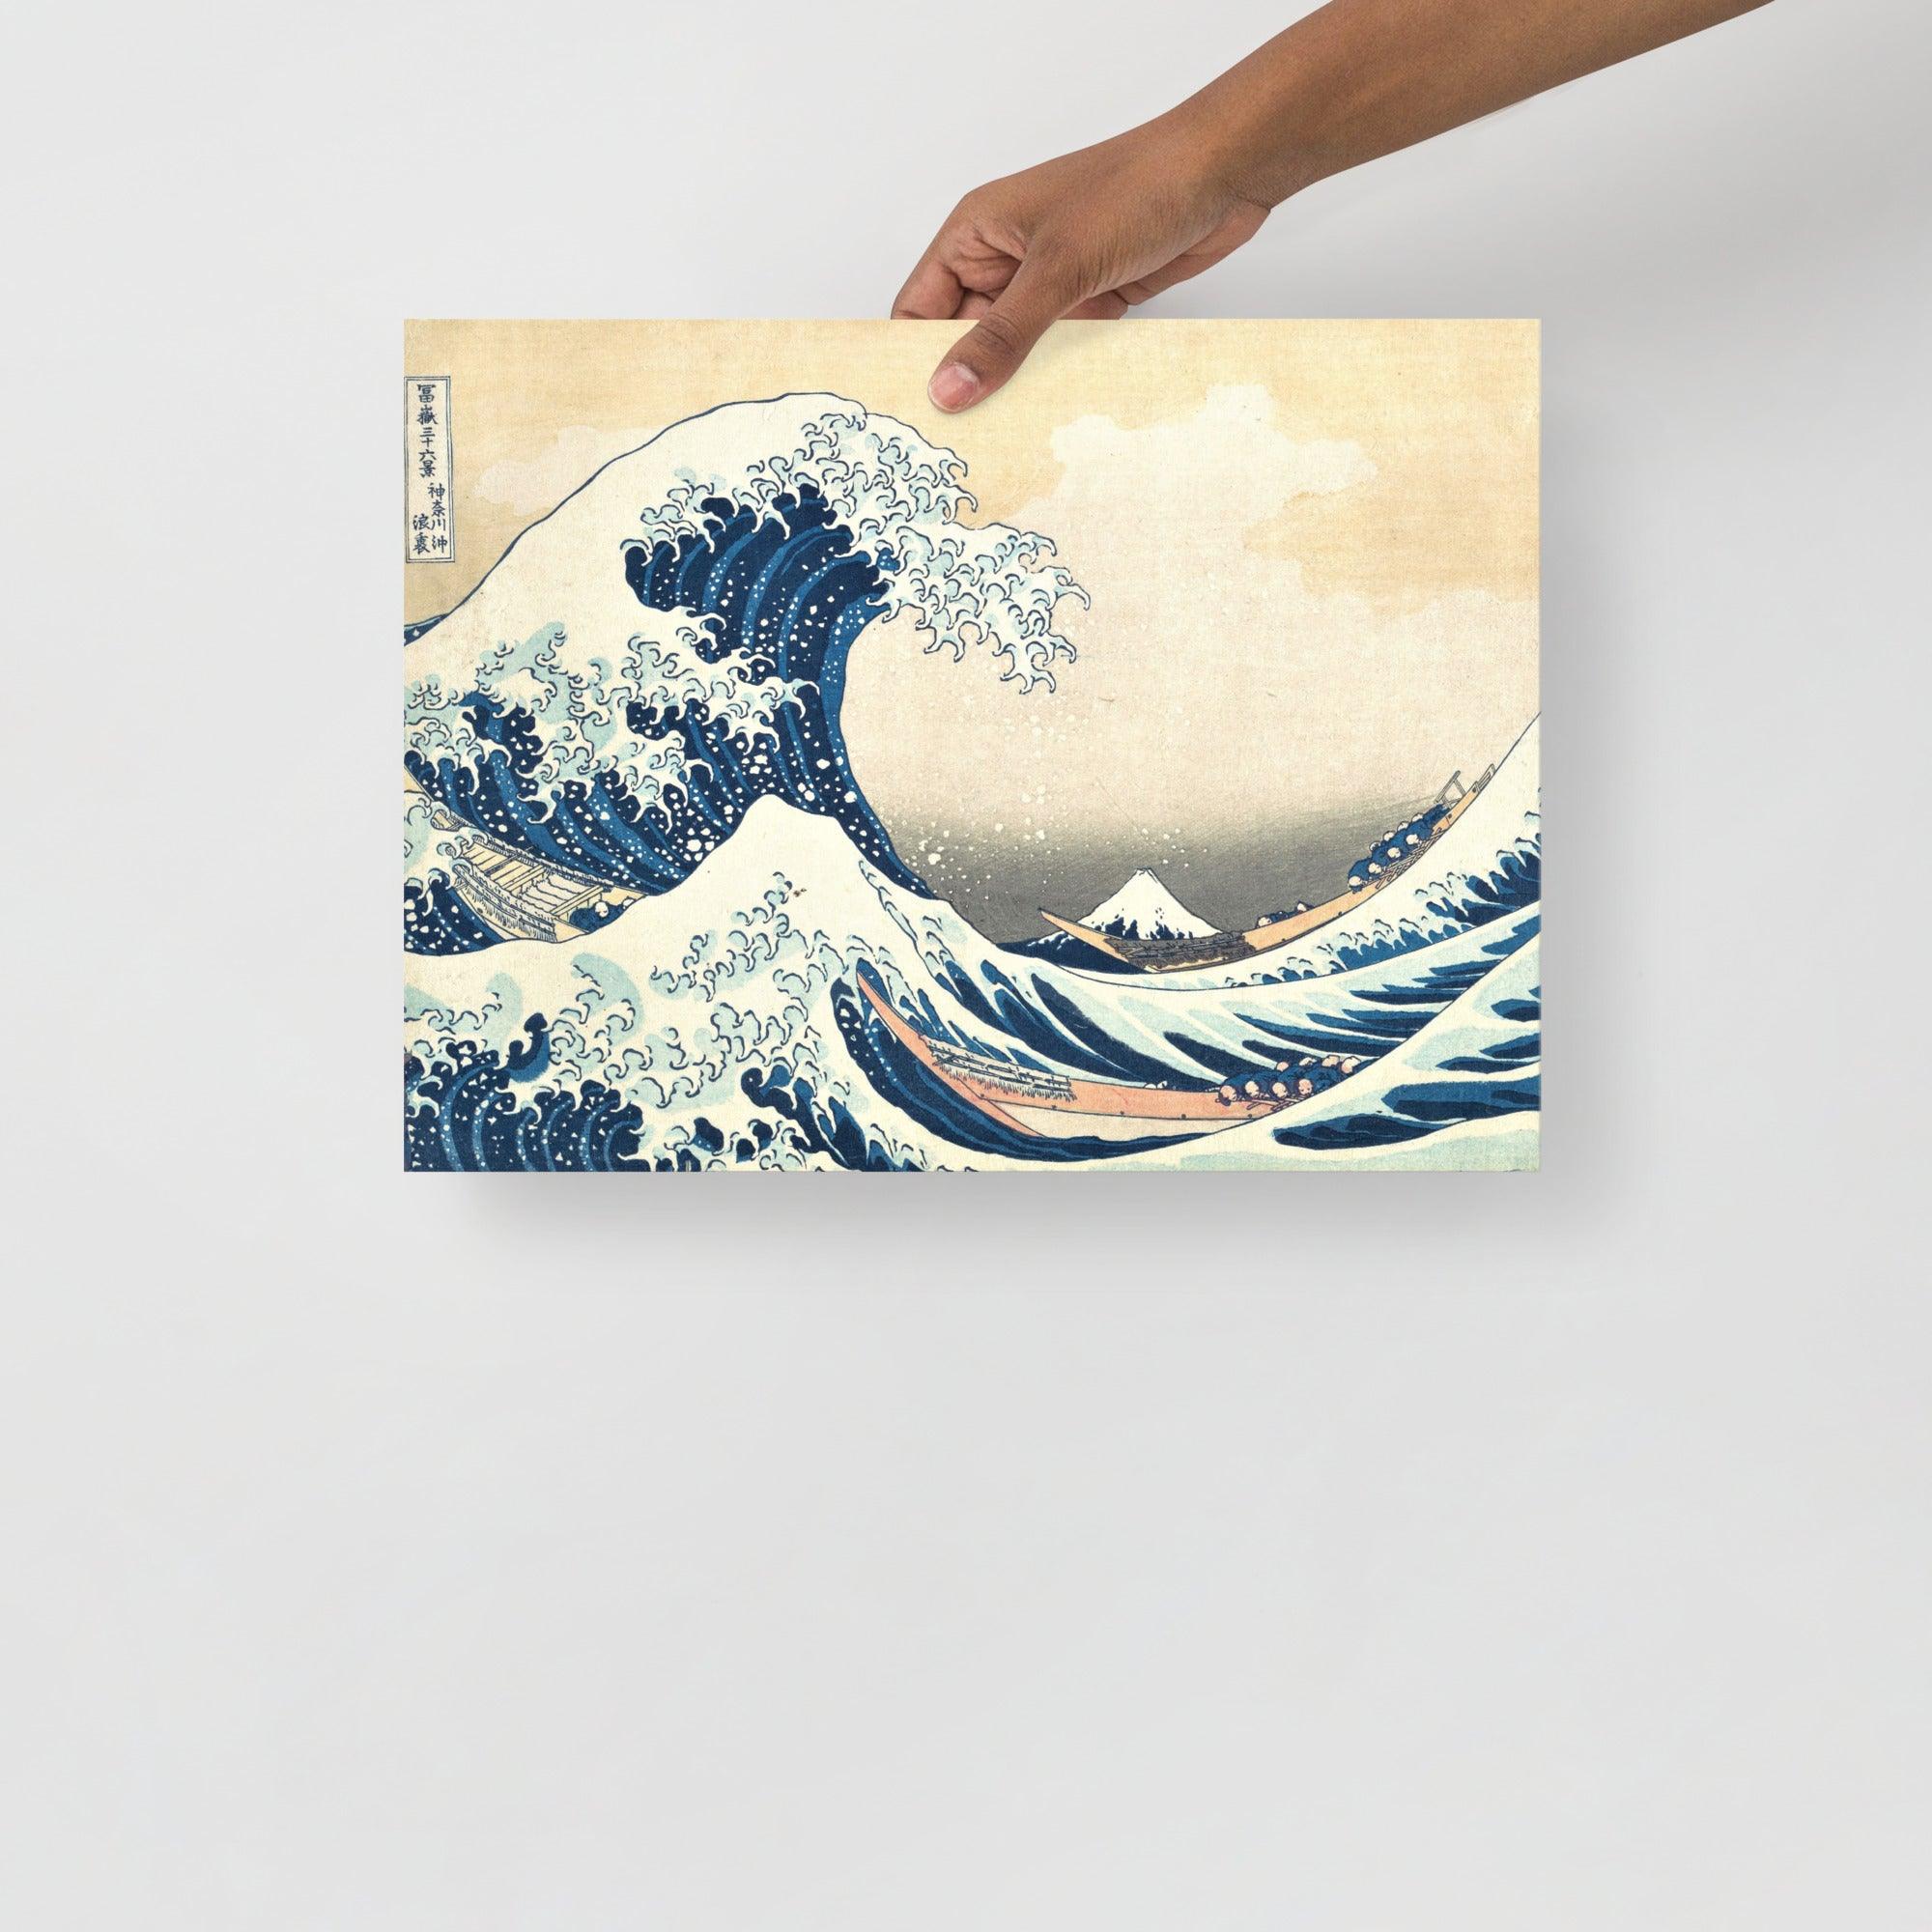 The Great Wave off Kanagawa by Hokusai poster on a plain backdrop in size 12x16”.